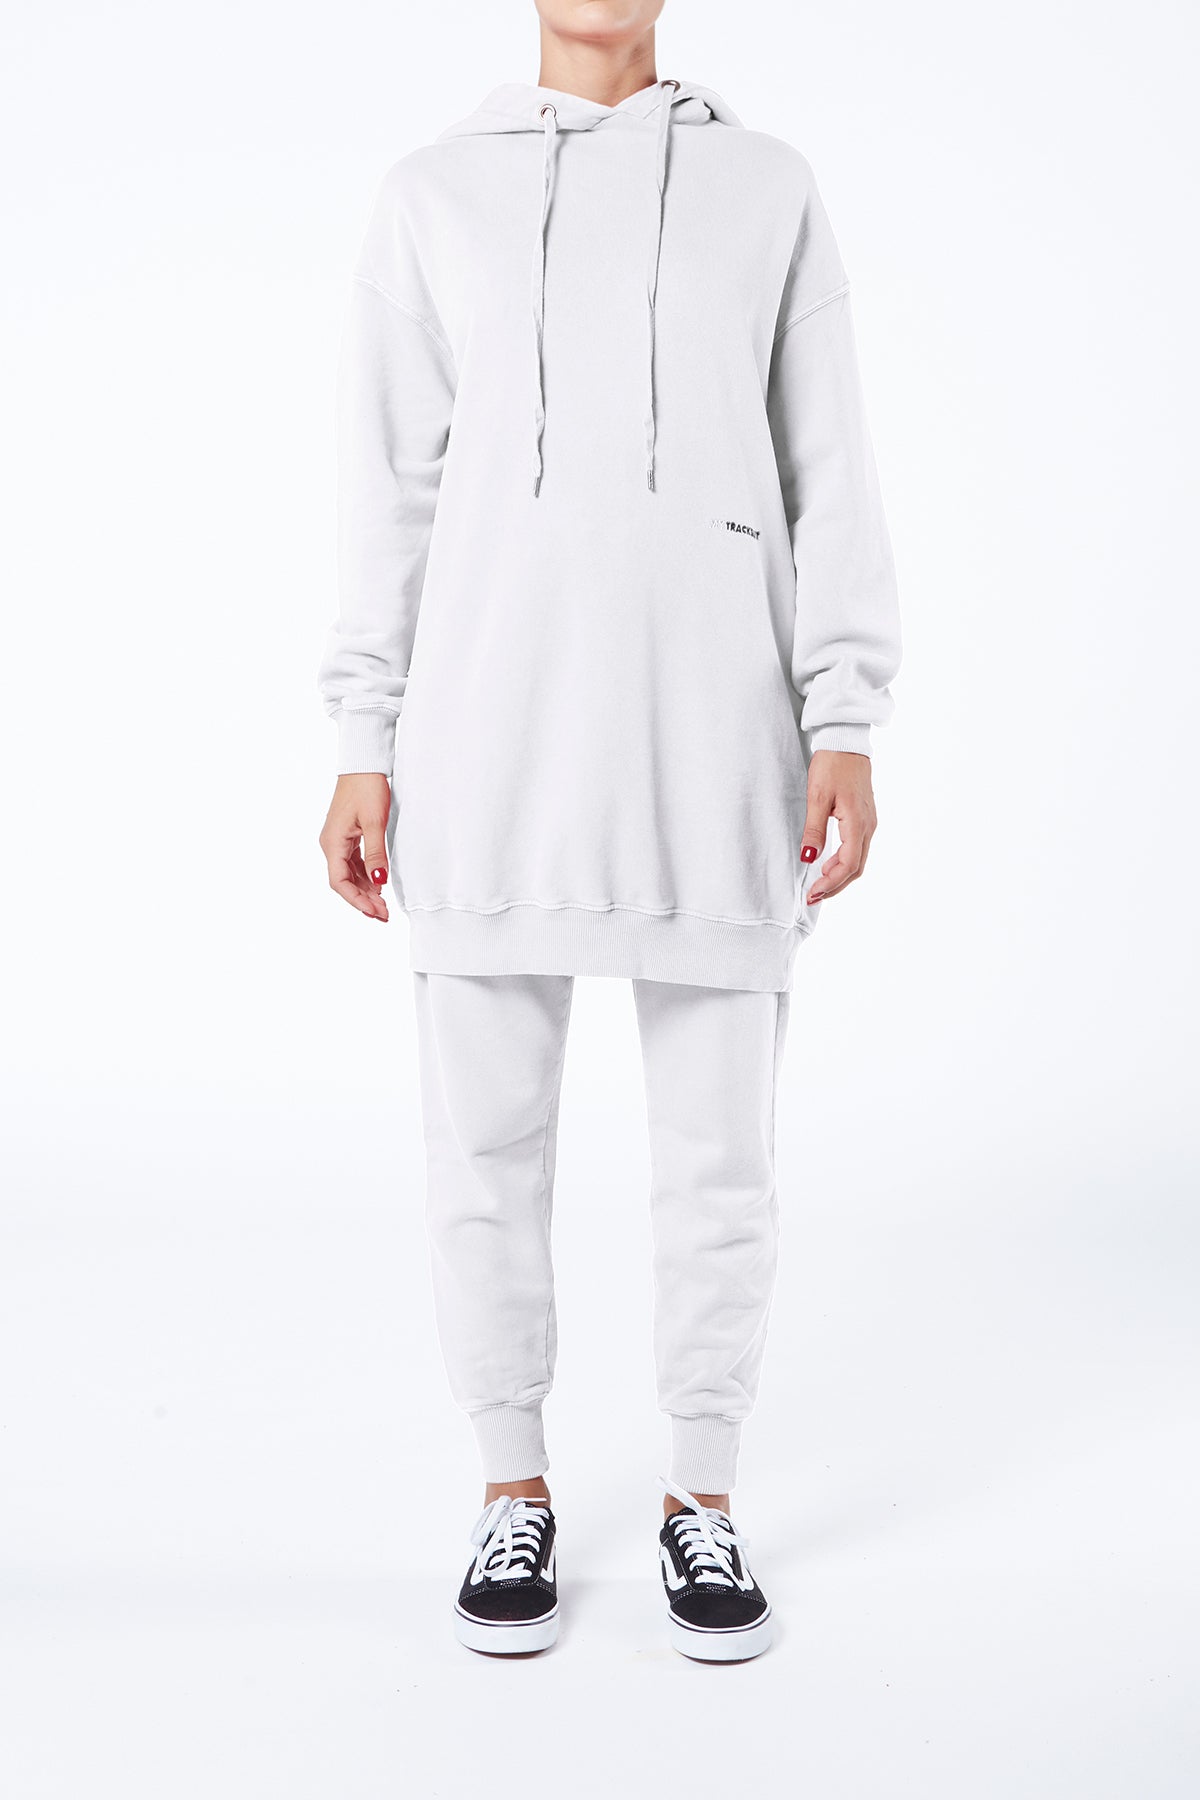 MYTRACKSUIT - LONG OVER HOODIE SWEATER/RIBBED BAND PANTS WHITE